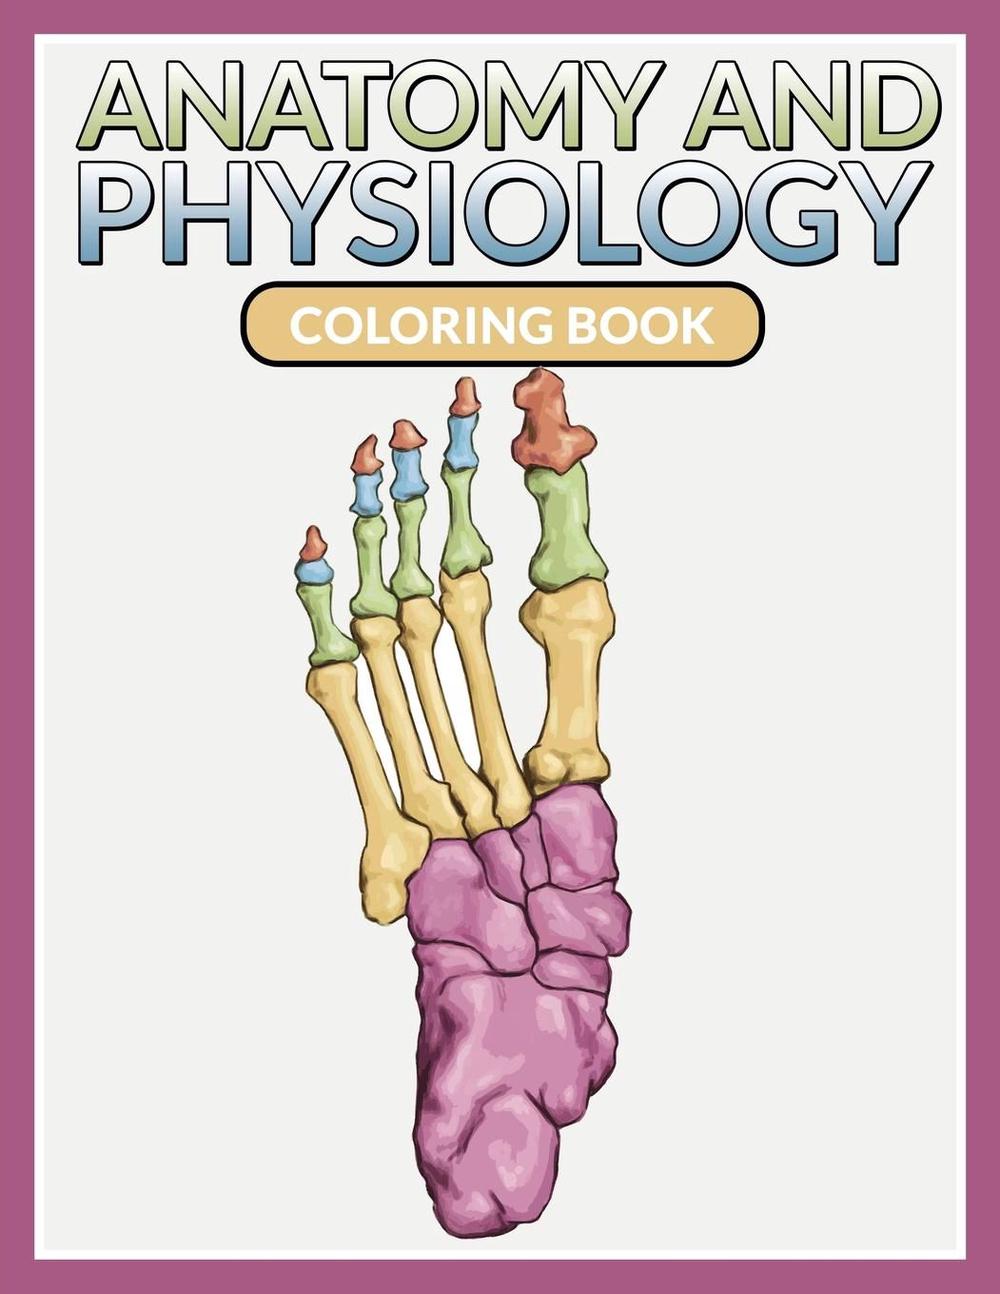 Anatomy And Physiology Coloring Book by Speedy Publishing